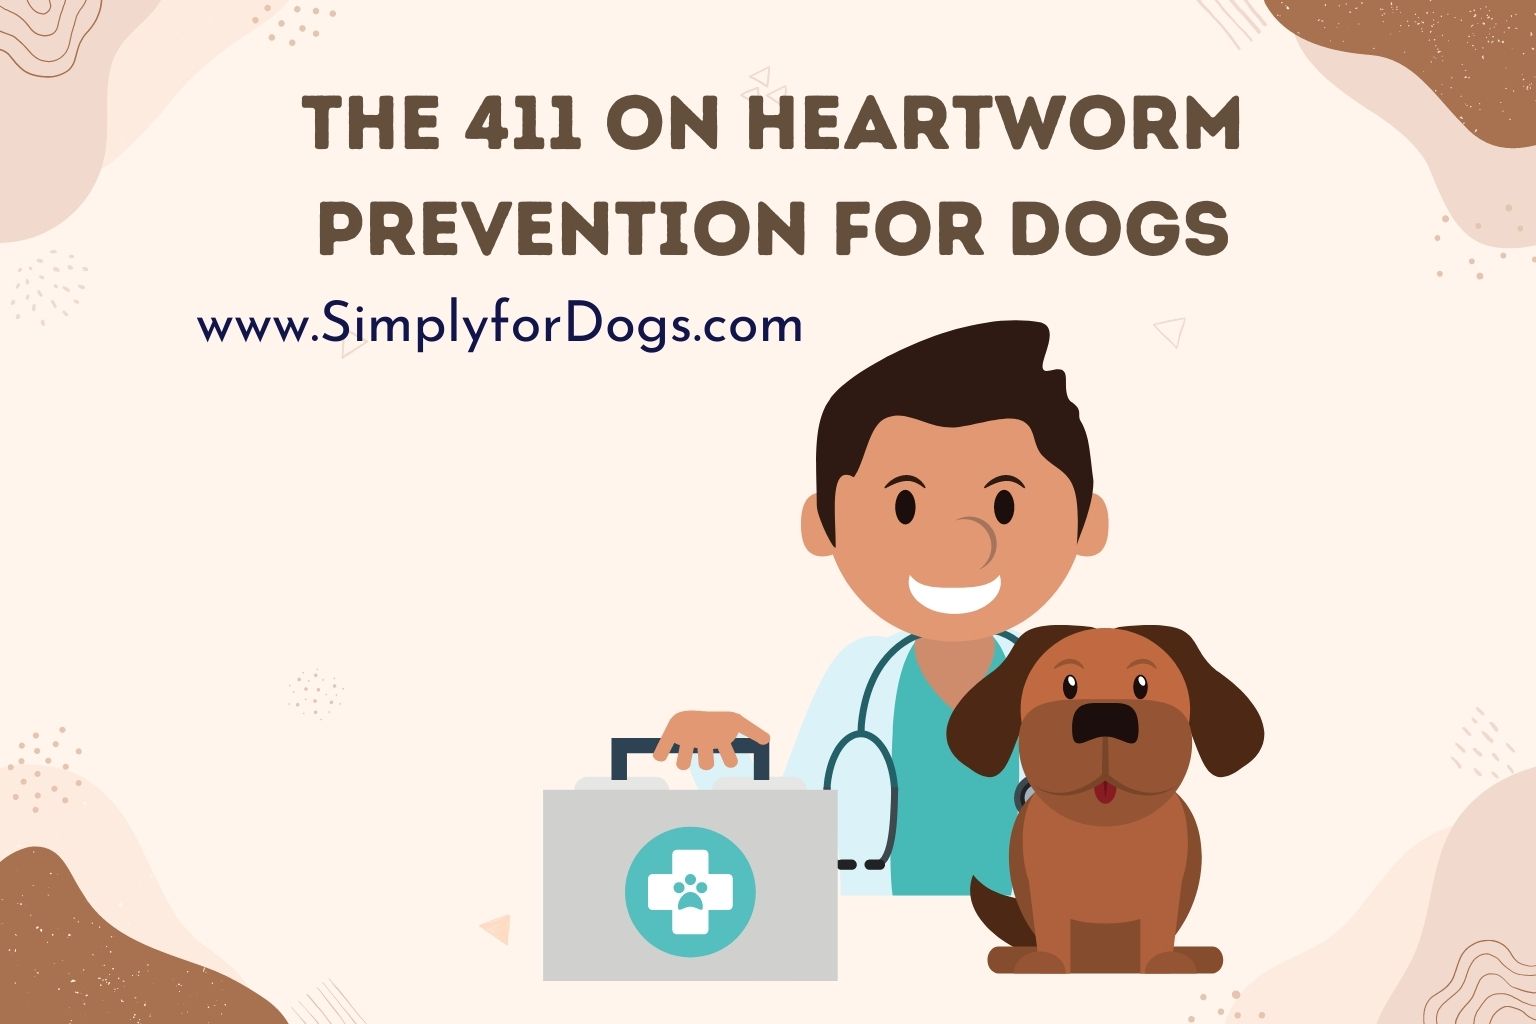 The 411 on Heartworm Prevention for Dogs